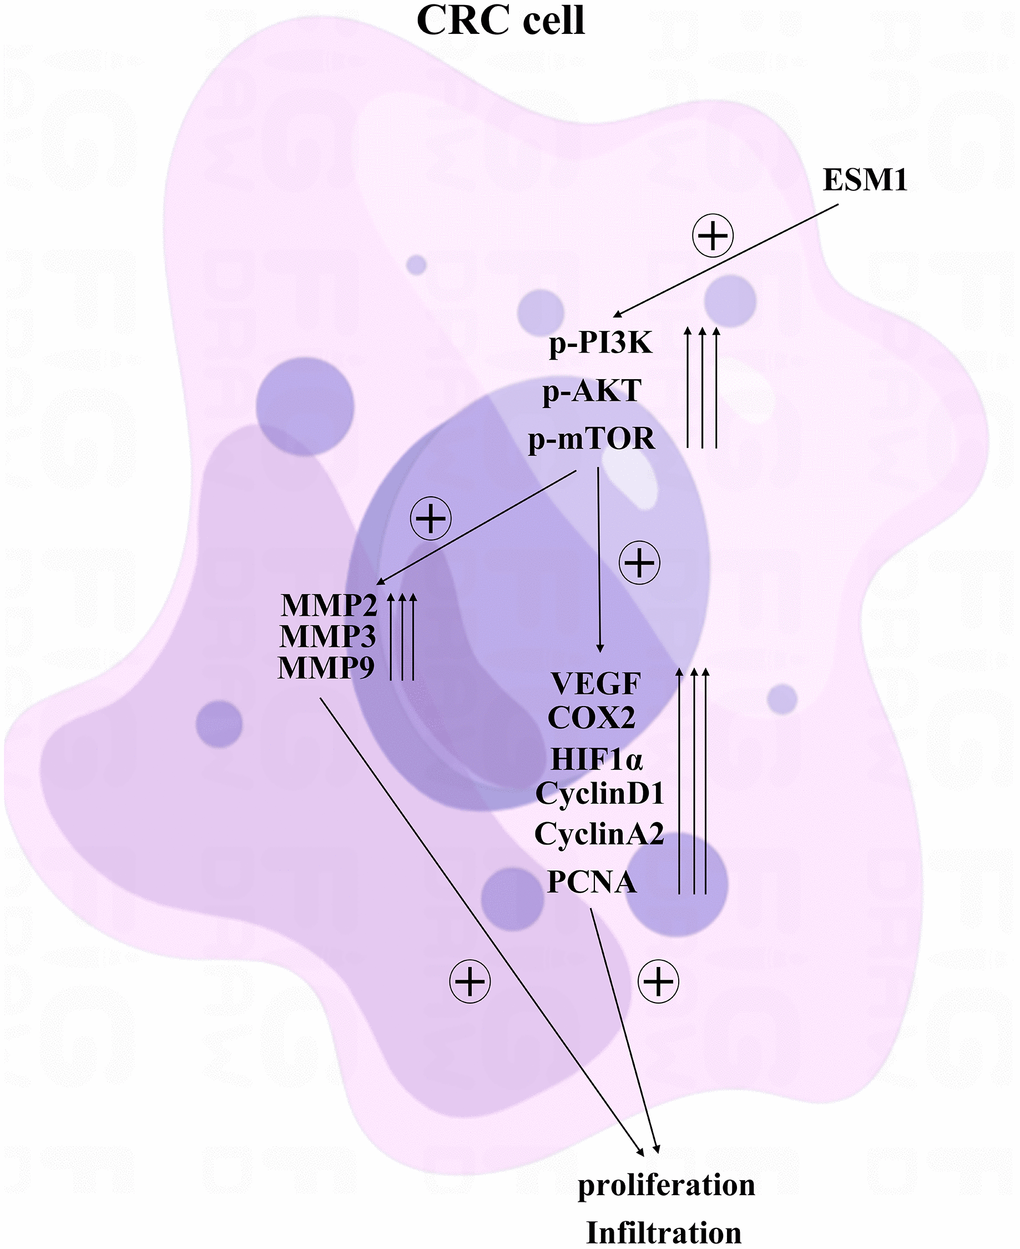 ESM1 may affect the proliferation of CRC cells through the PI3K/Akt/mTOR pathway.